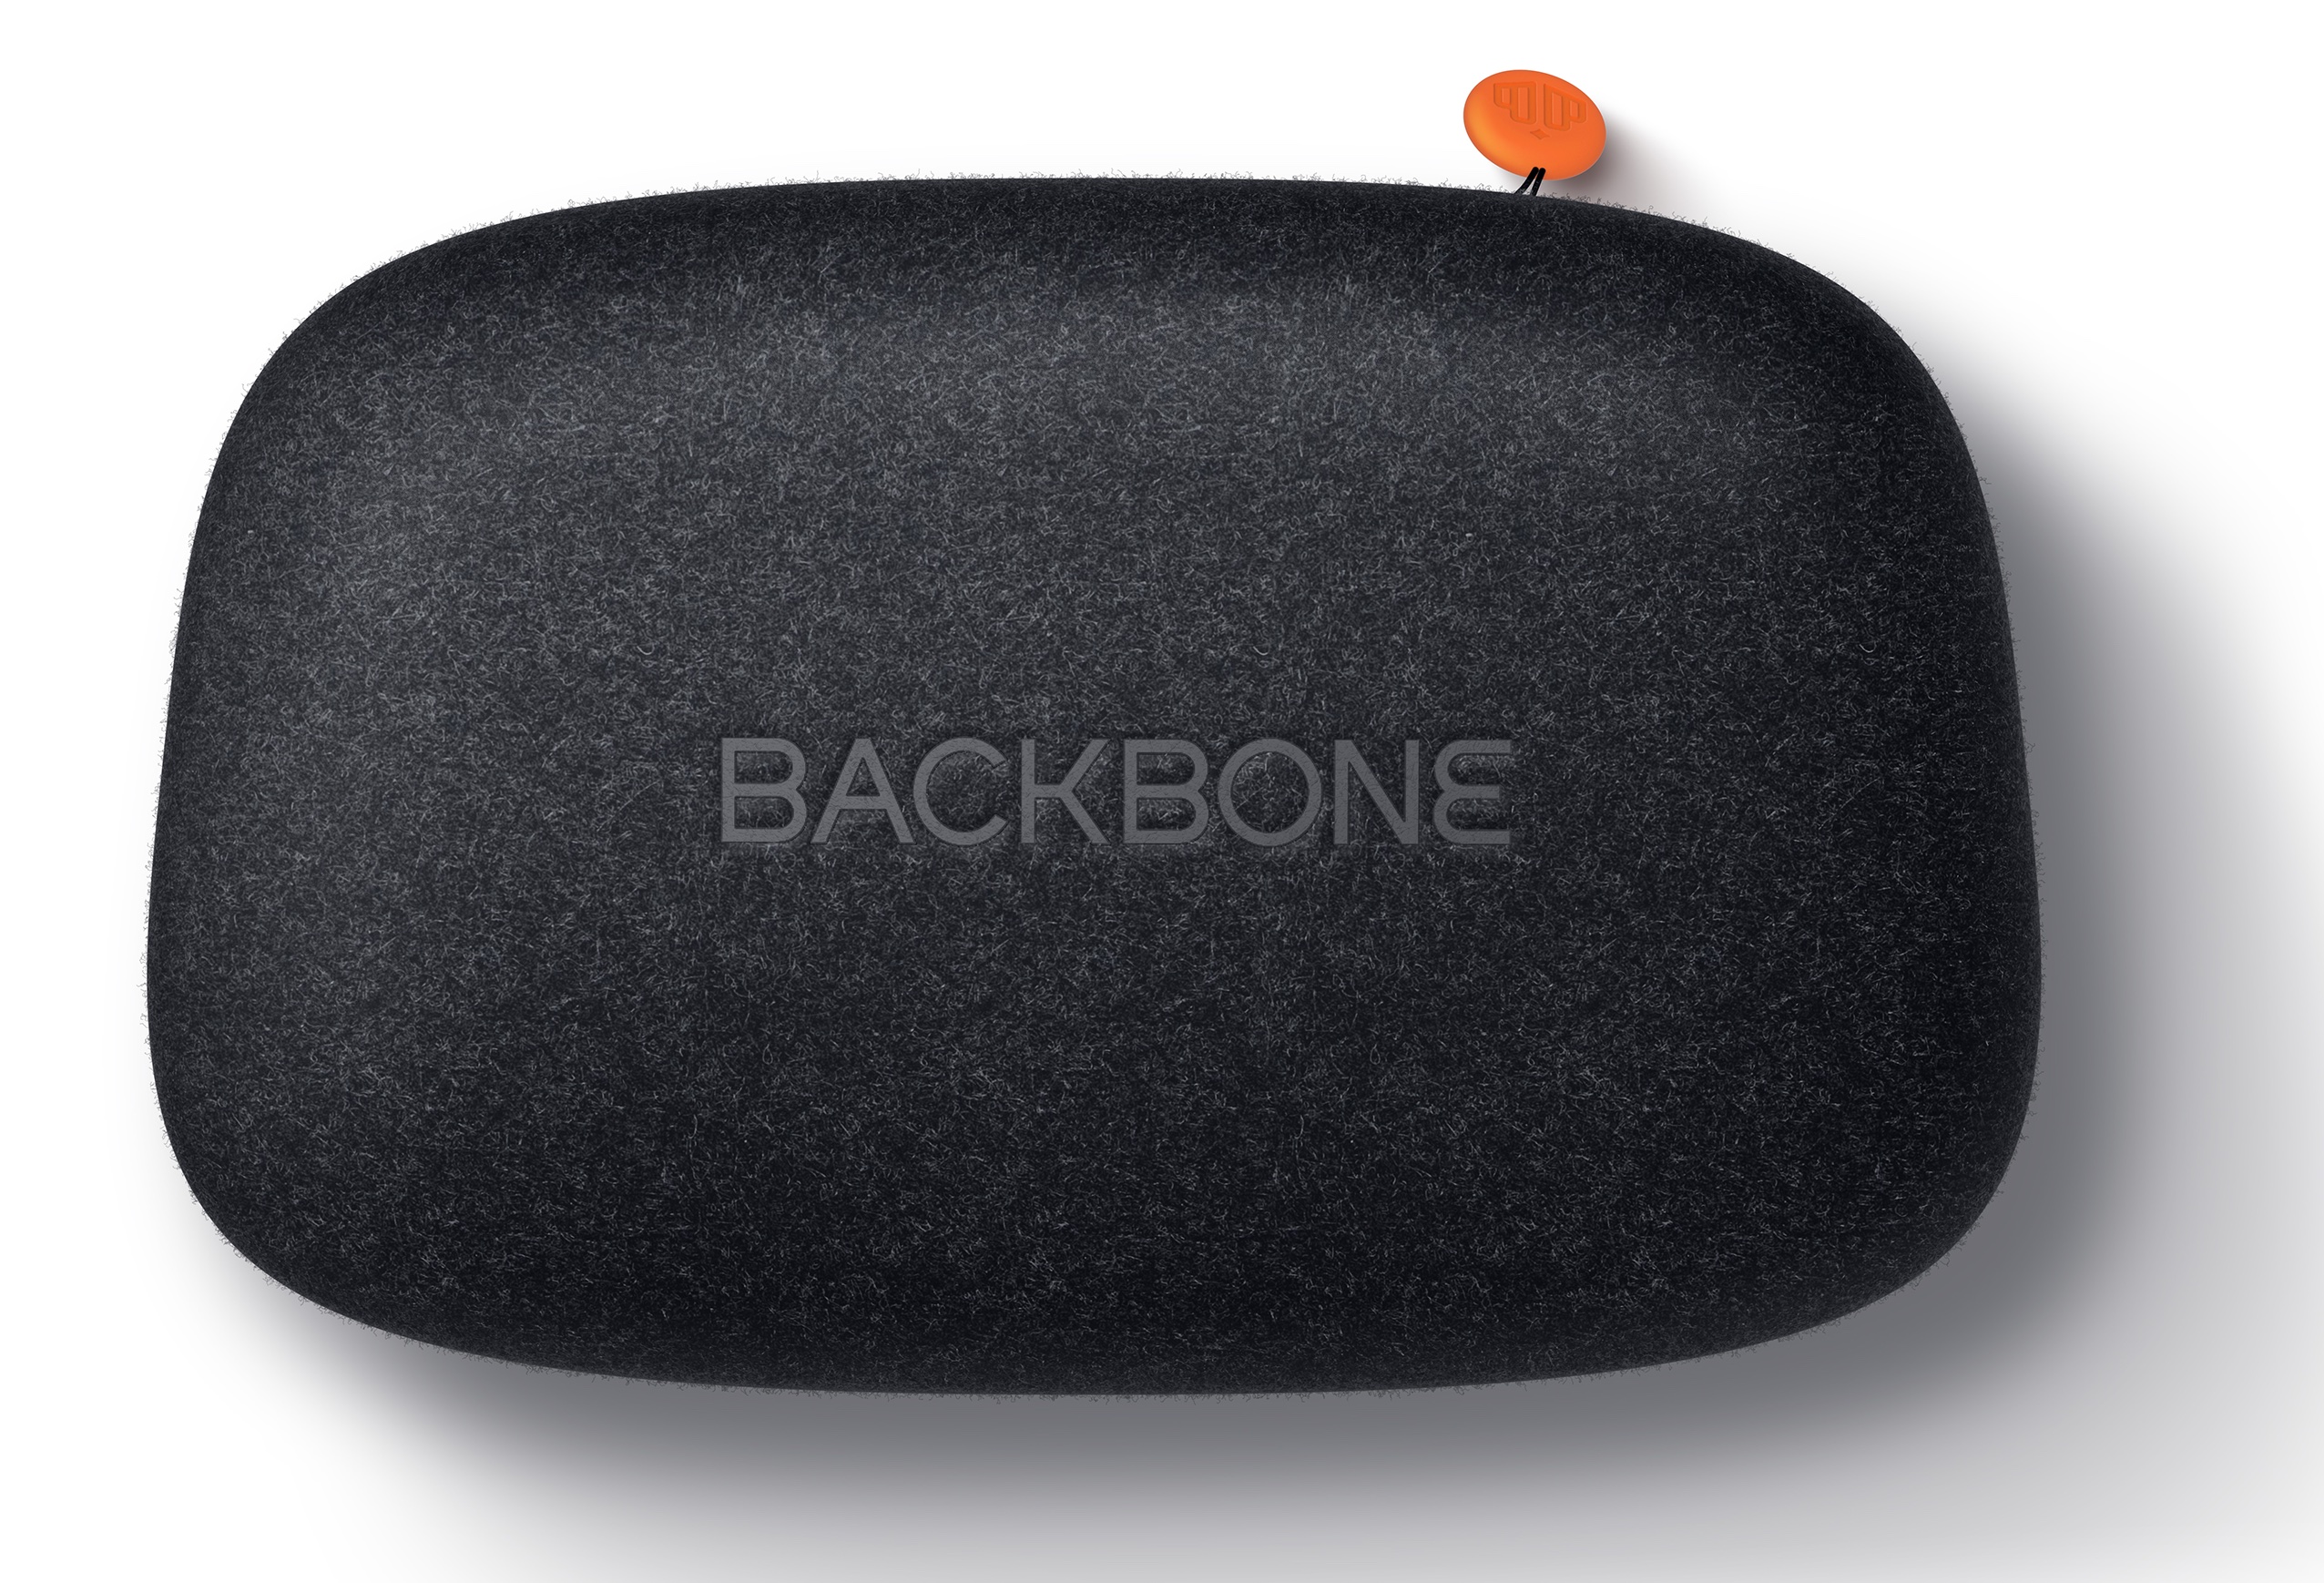 Backbone Holiday 2023 Lineup Includes Updated Universal USB-C